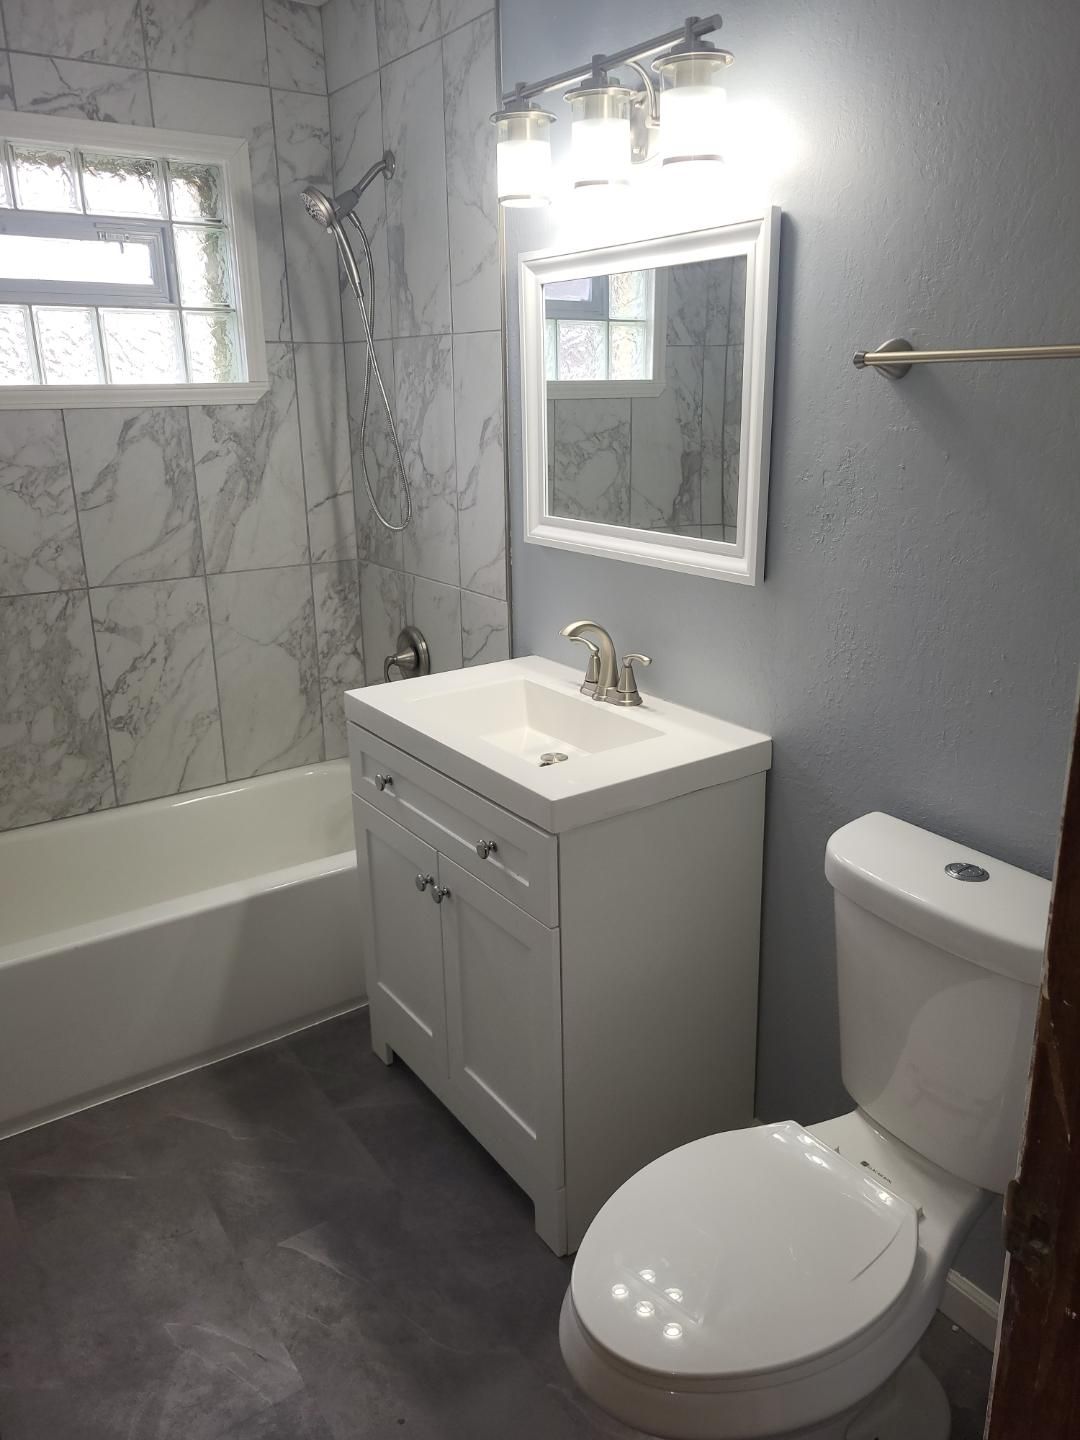 Gallery | West Allis, WI | A Fresh New Look Home Improvements